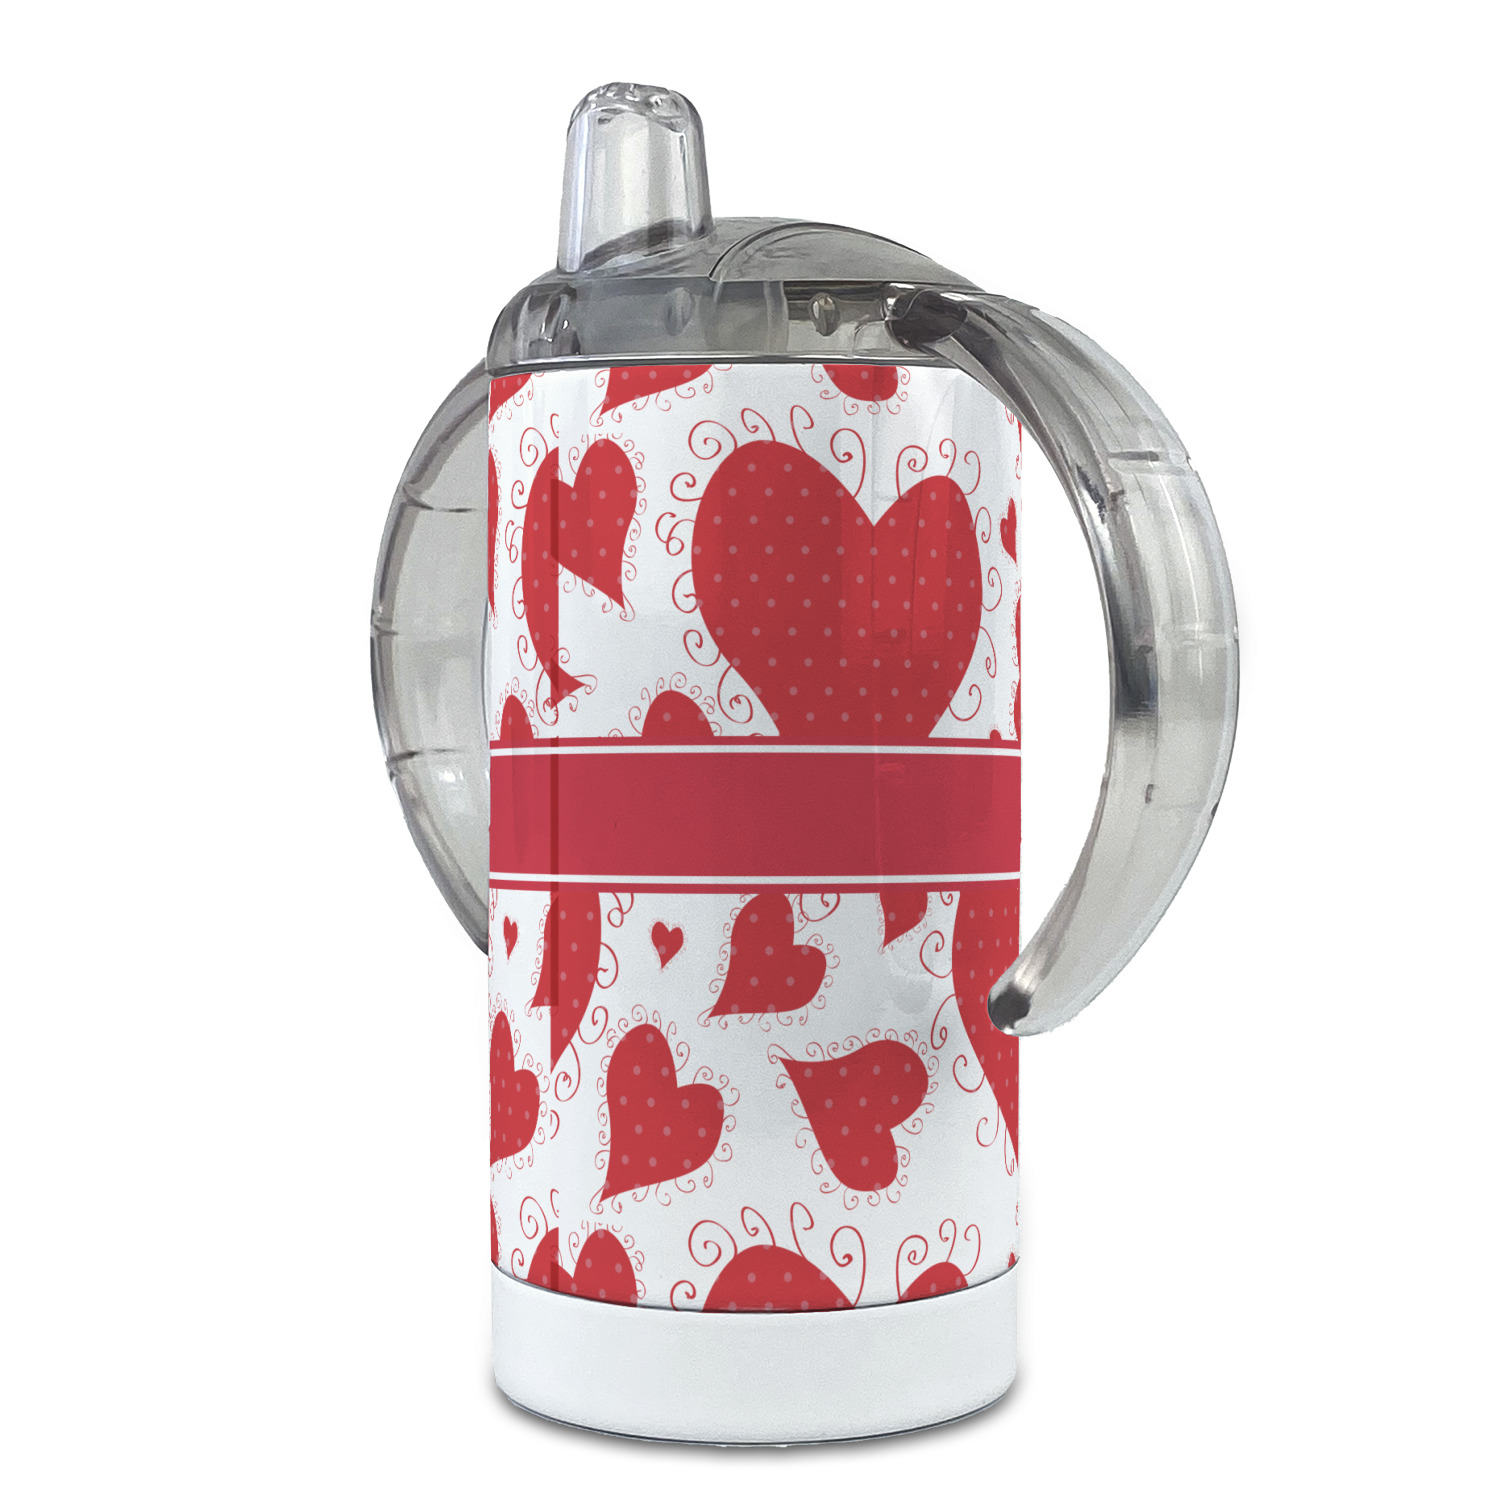 https://www.youcustomizeit.com/common/MAKE/200617/Cute-Squirrel-Couple-12-oz-Stainless-Steel-Sippy-Cups-FULL-back-angle.jpg?lm=1671168443